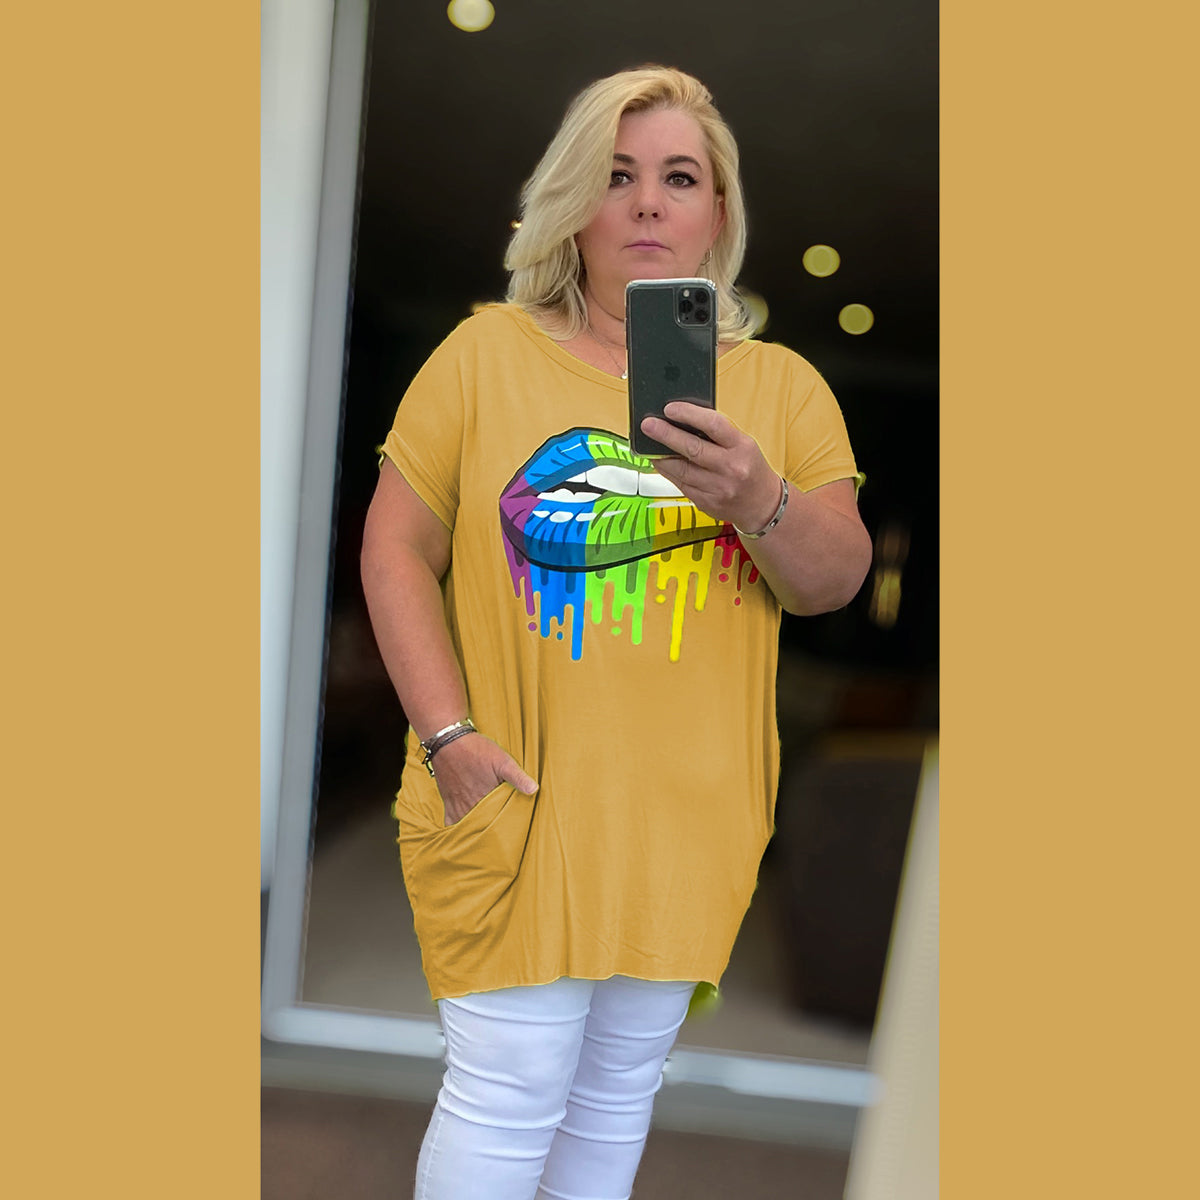 LONG DIPPED HEM TOP RAINBOW LIPS AND SIDE POCKETS